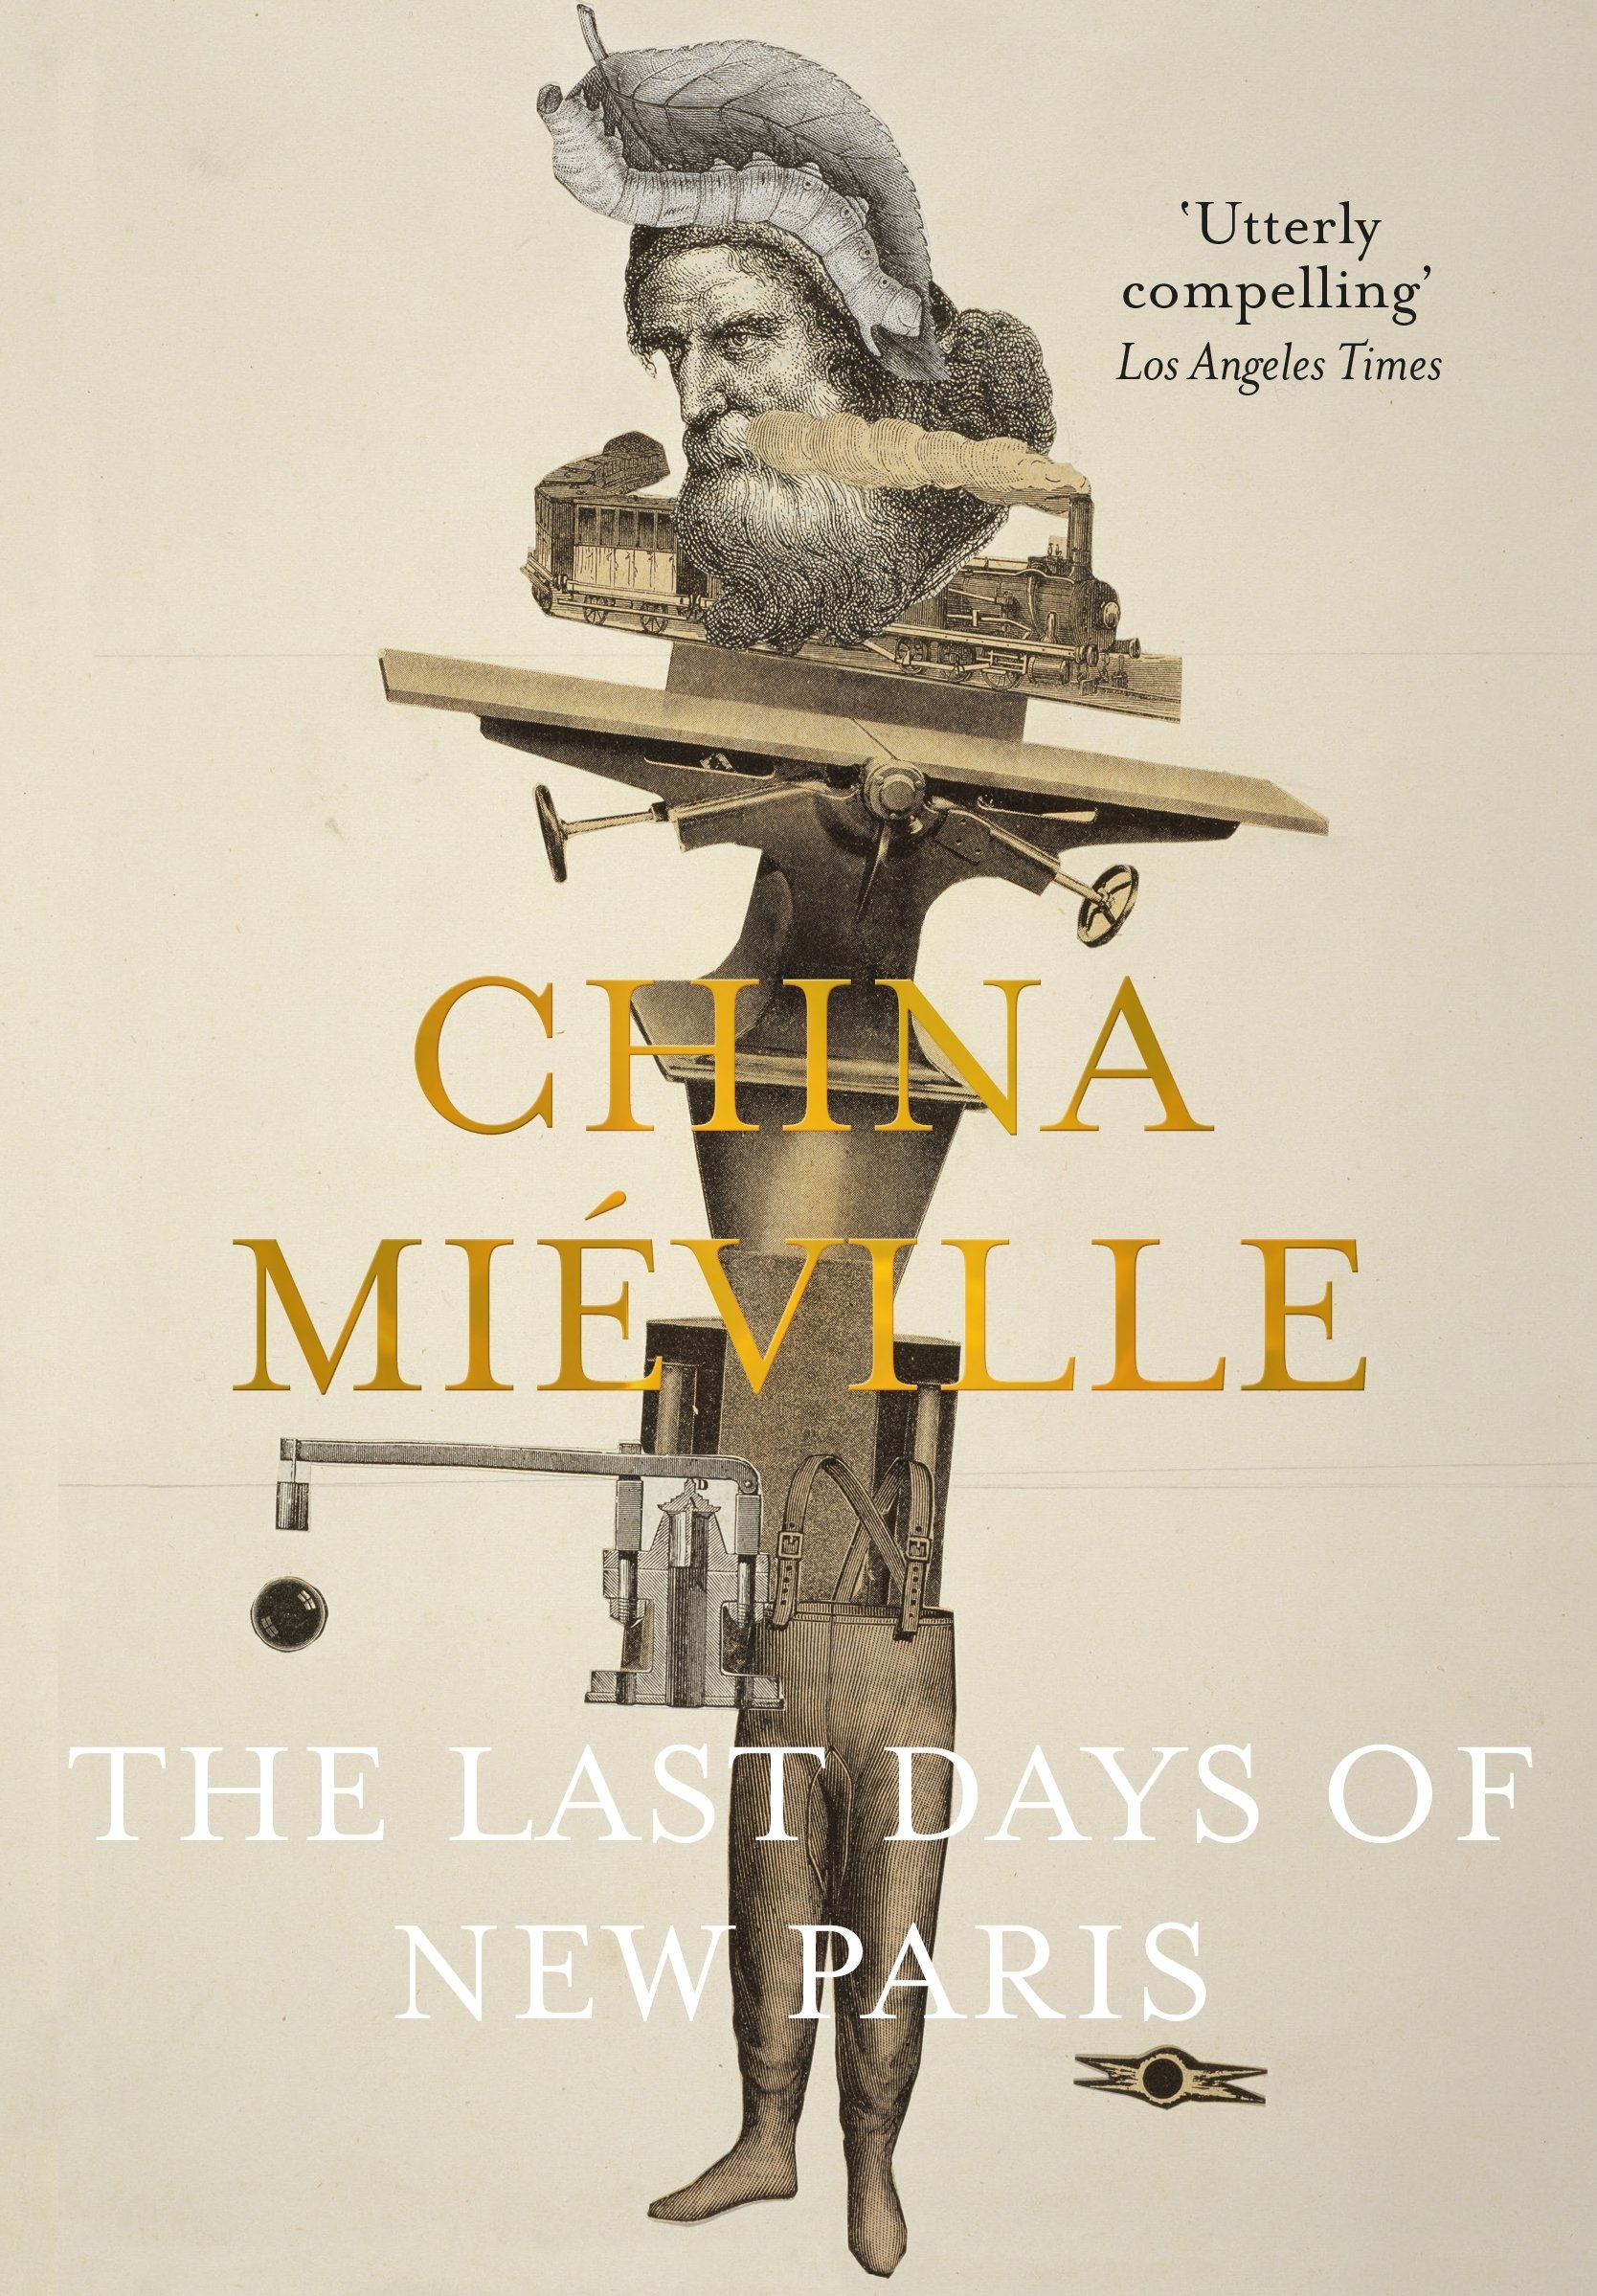 The Last Days of New Paris | China Mieville image5